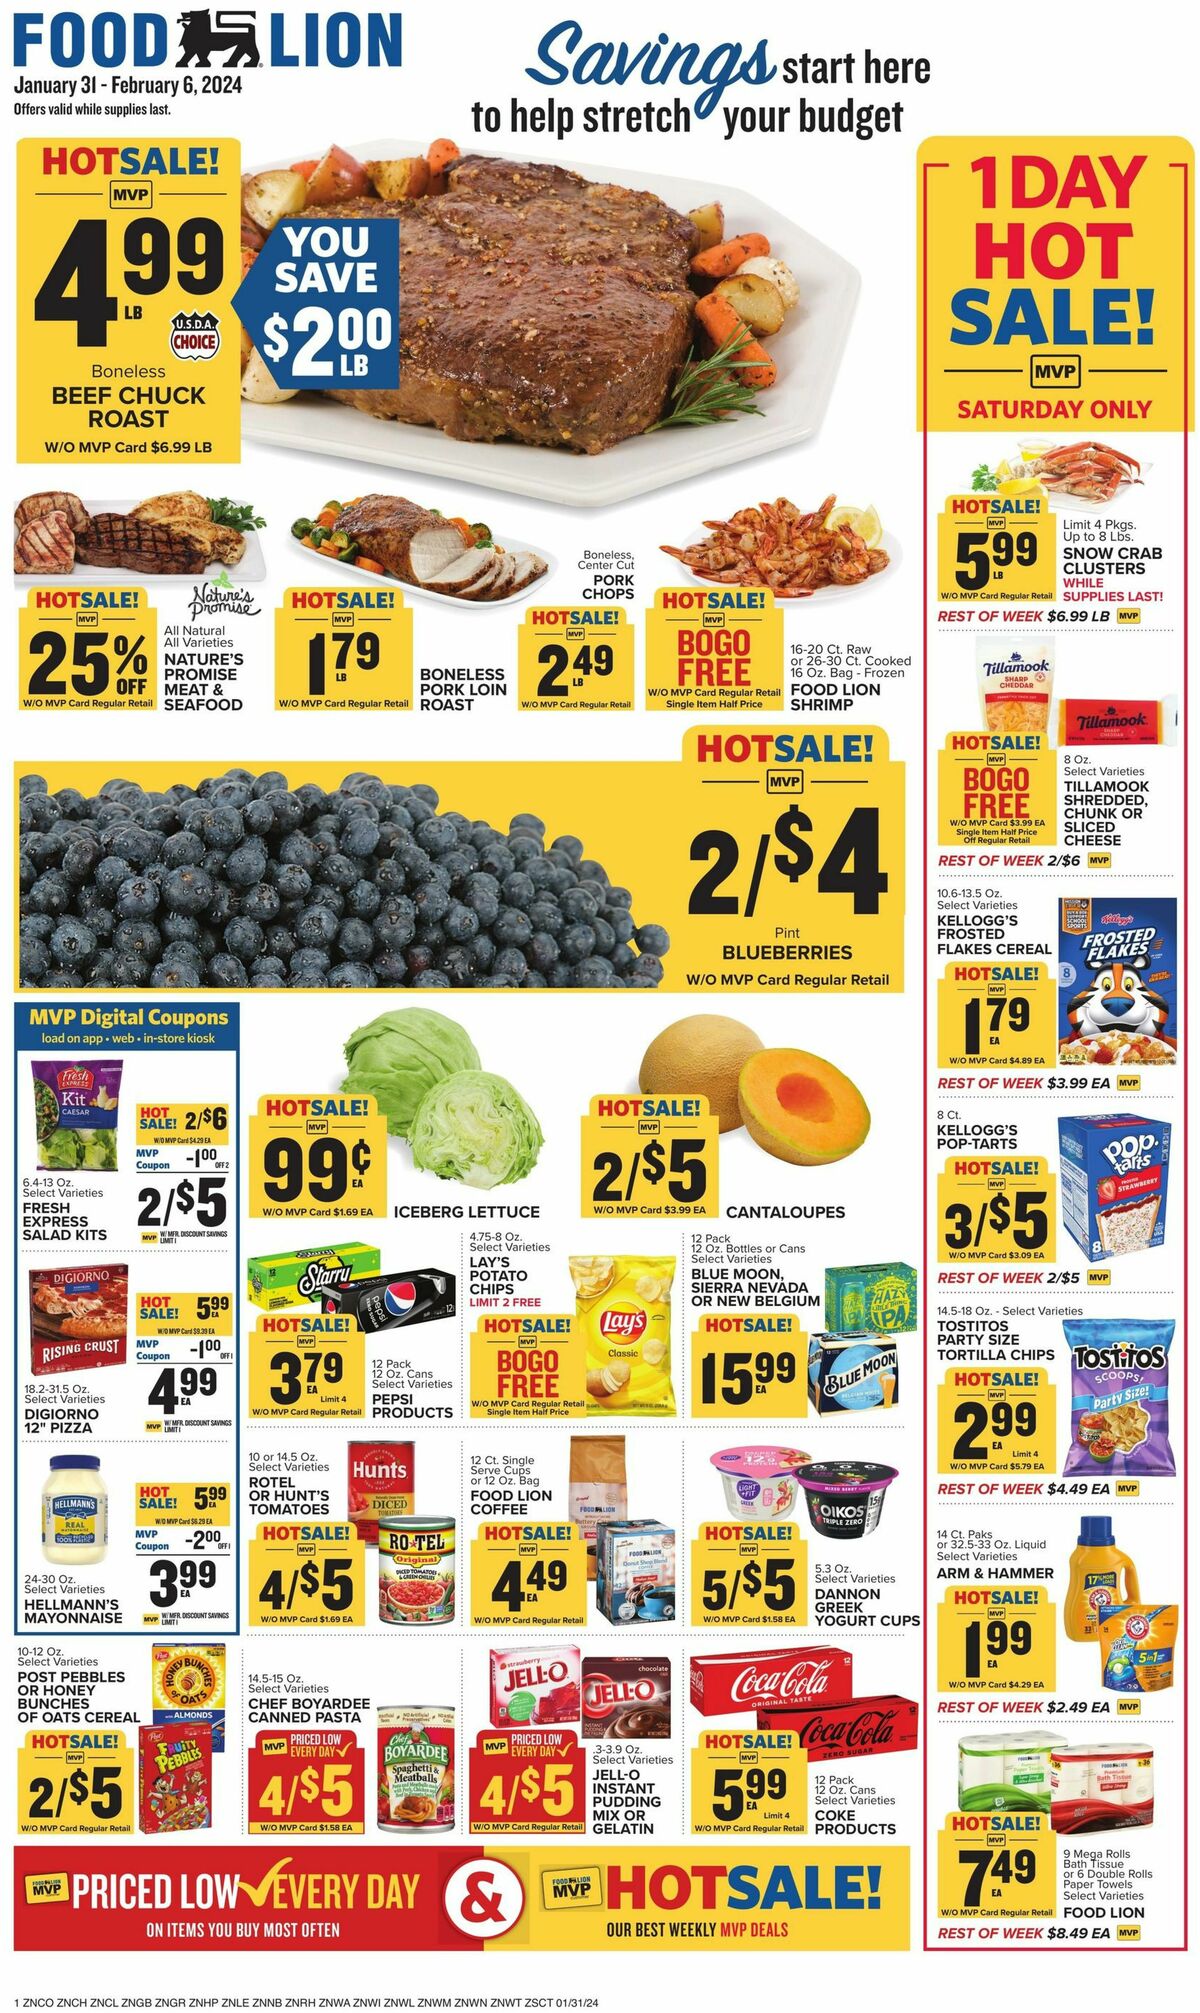 Food Lion Weekly Ad from January 31